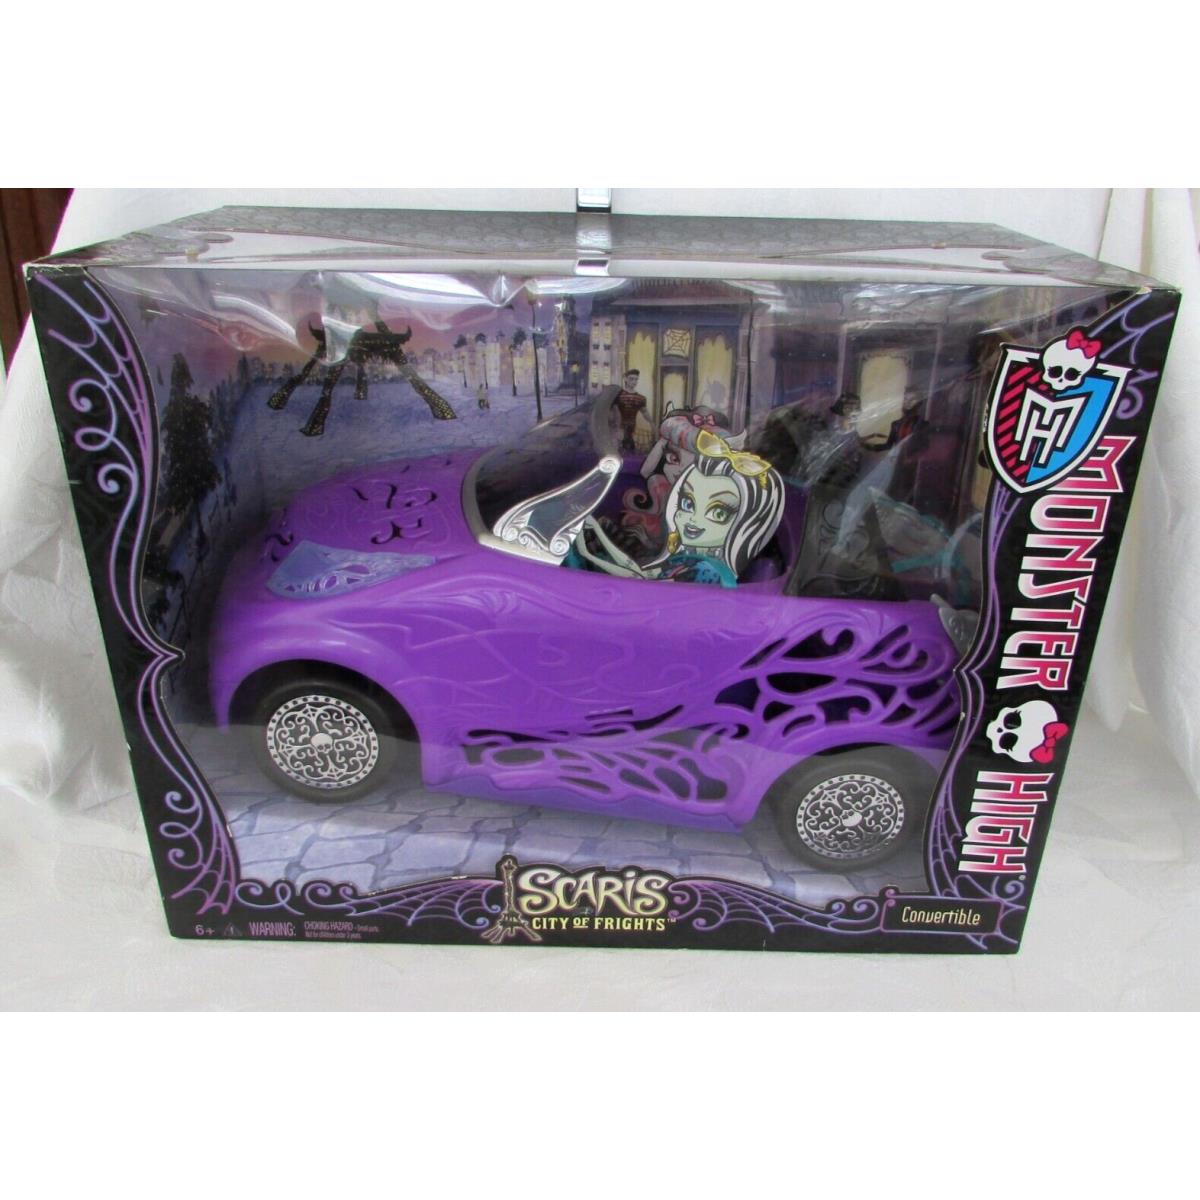 Monster High Doll Car Convertible Scaris City of Frights Package 2012